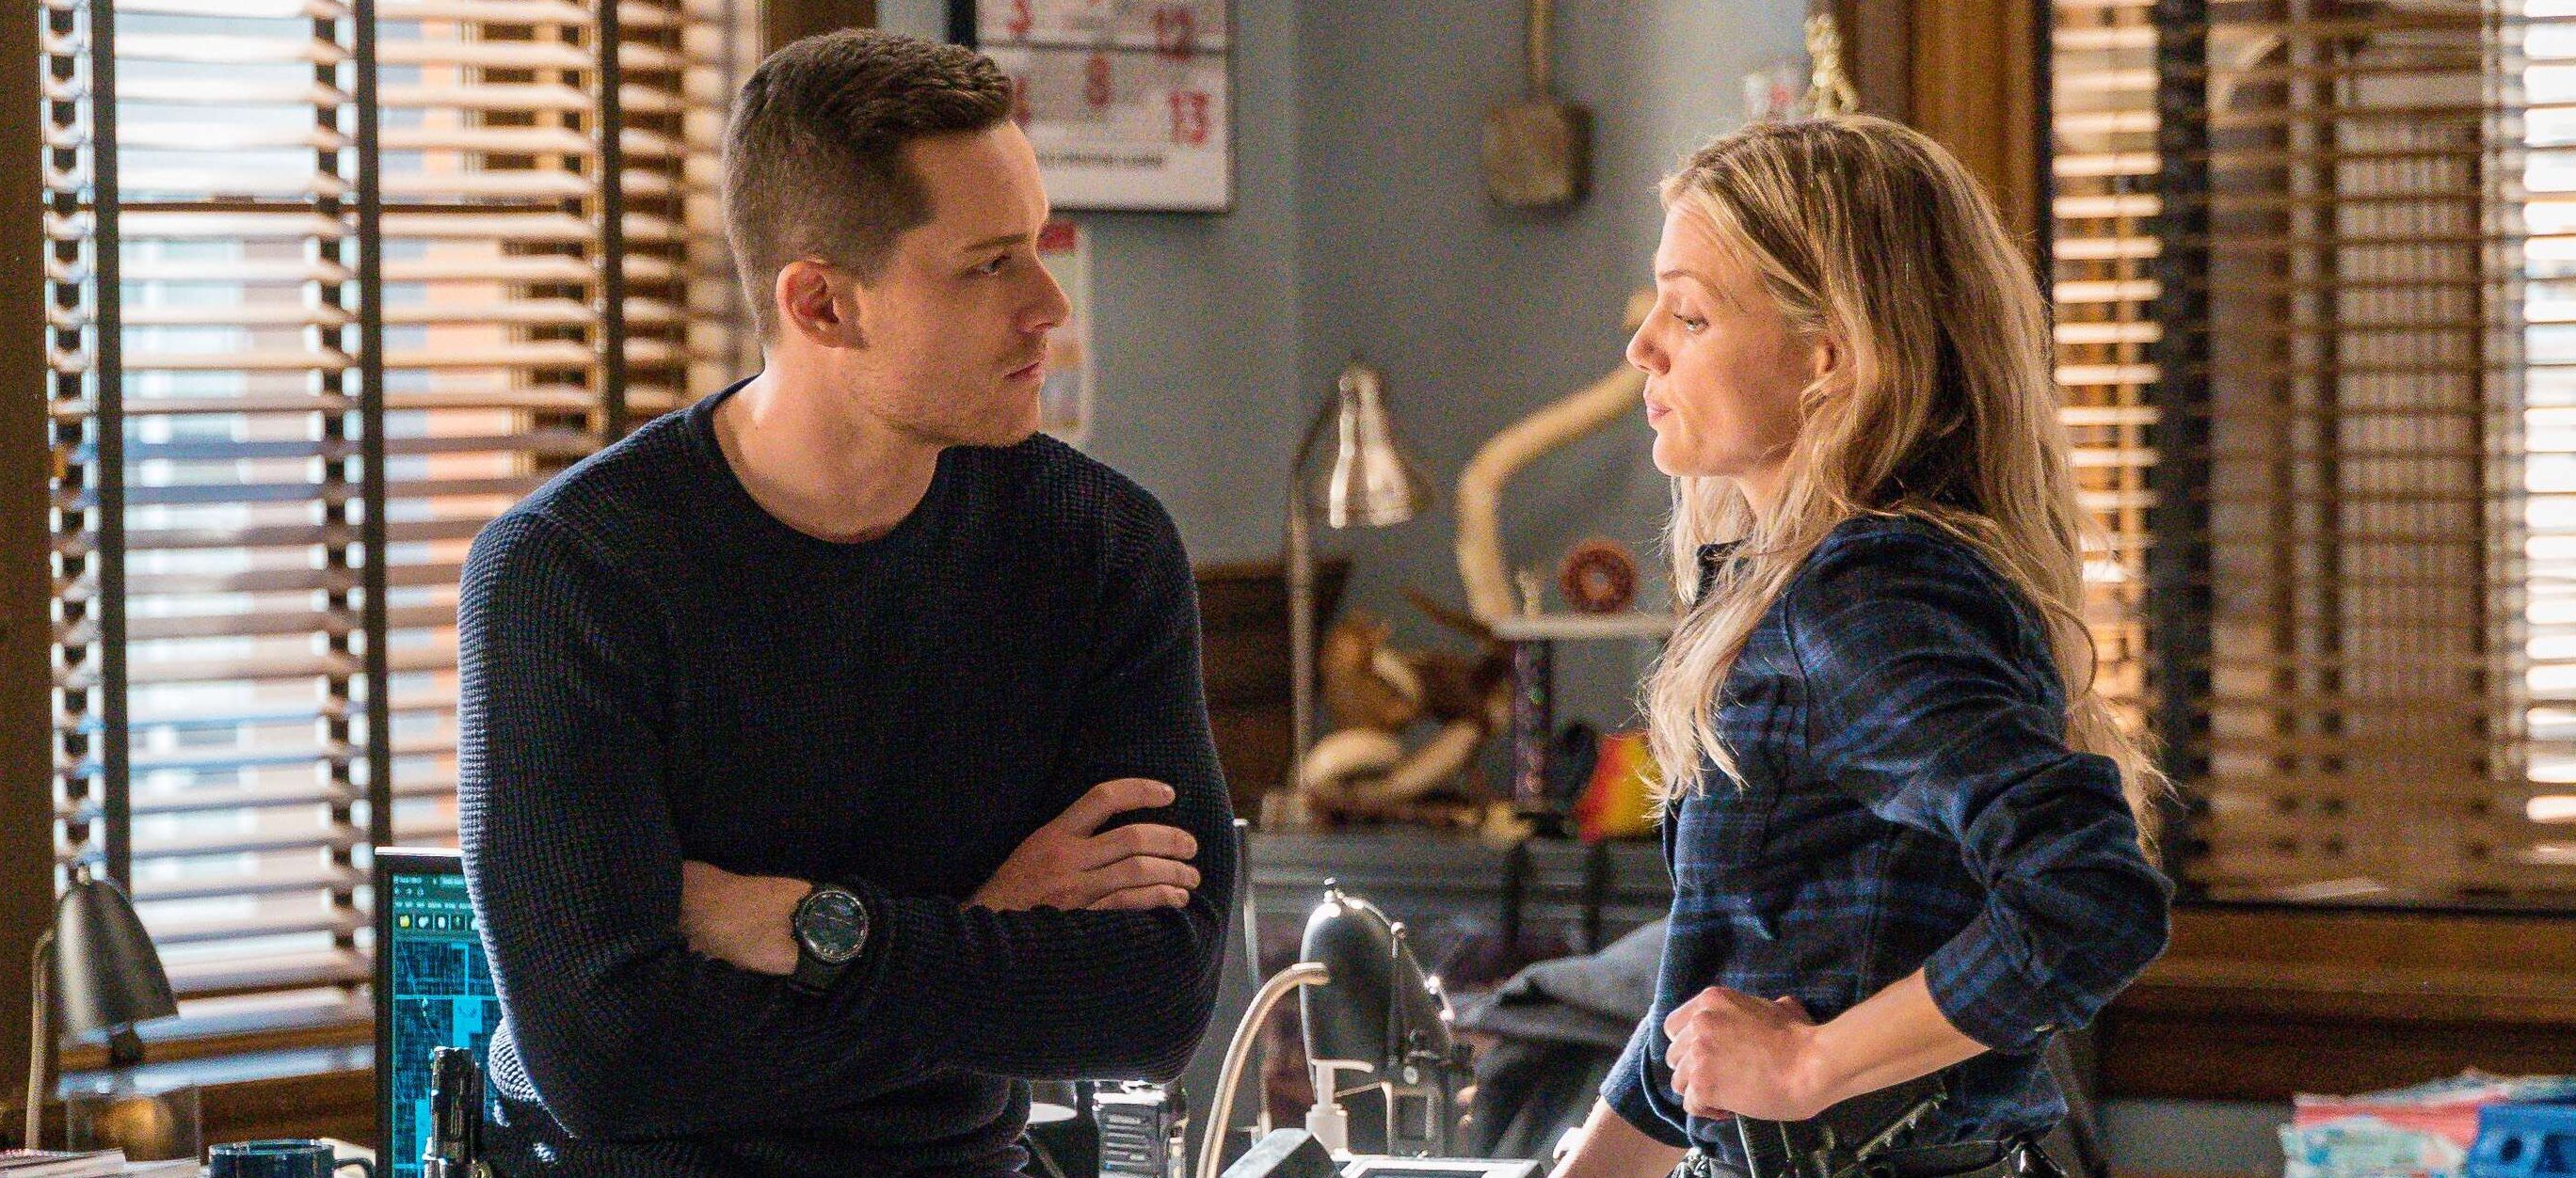 Are Jay and Hailey Married in Chicago PD?